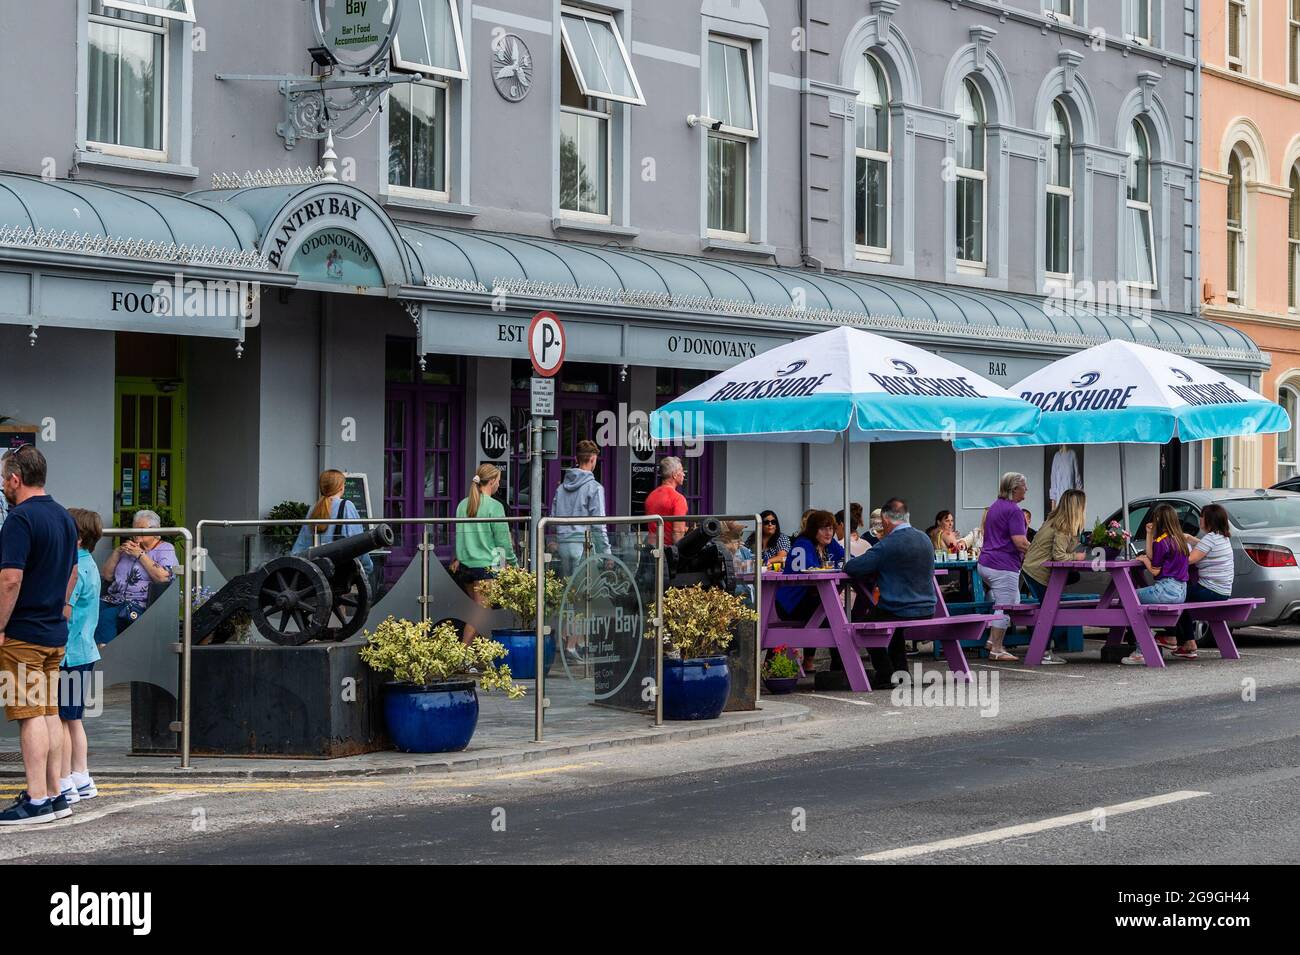 Bantry, West Cork, Ireland. 26th July, 2021. Today the so called 'wet pubs' reopened for the first time since the start of the pandemic. Despite indoor dining reopening, customers were still availing of outdoor eating at the Bantry Bay. Credit: AG News/Alamy Live News Stock Photo